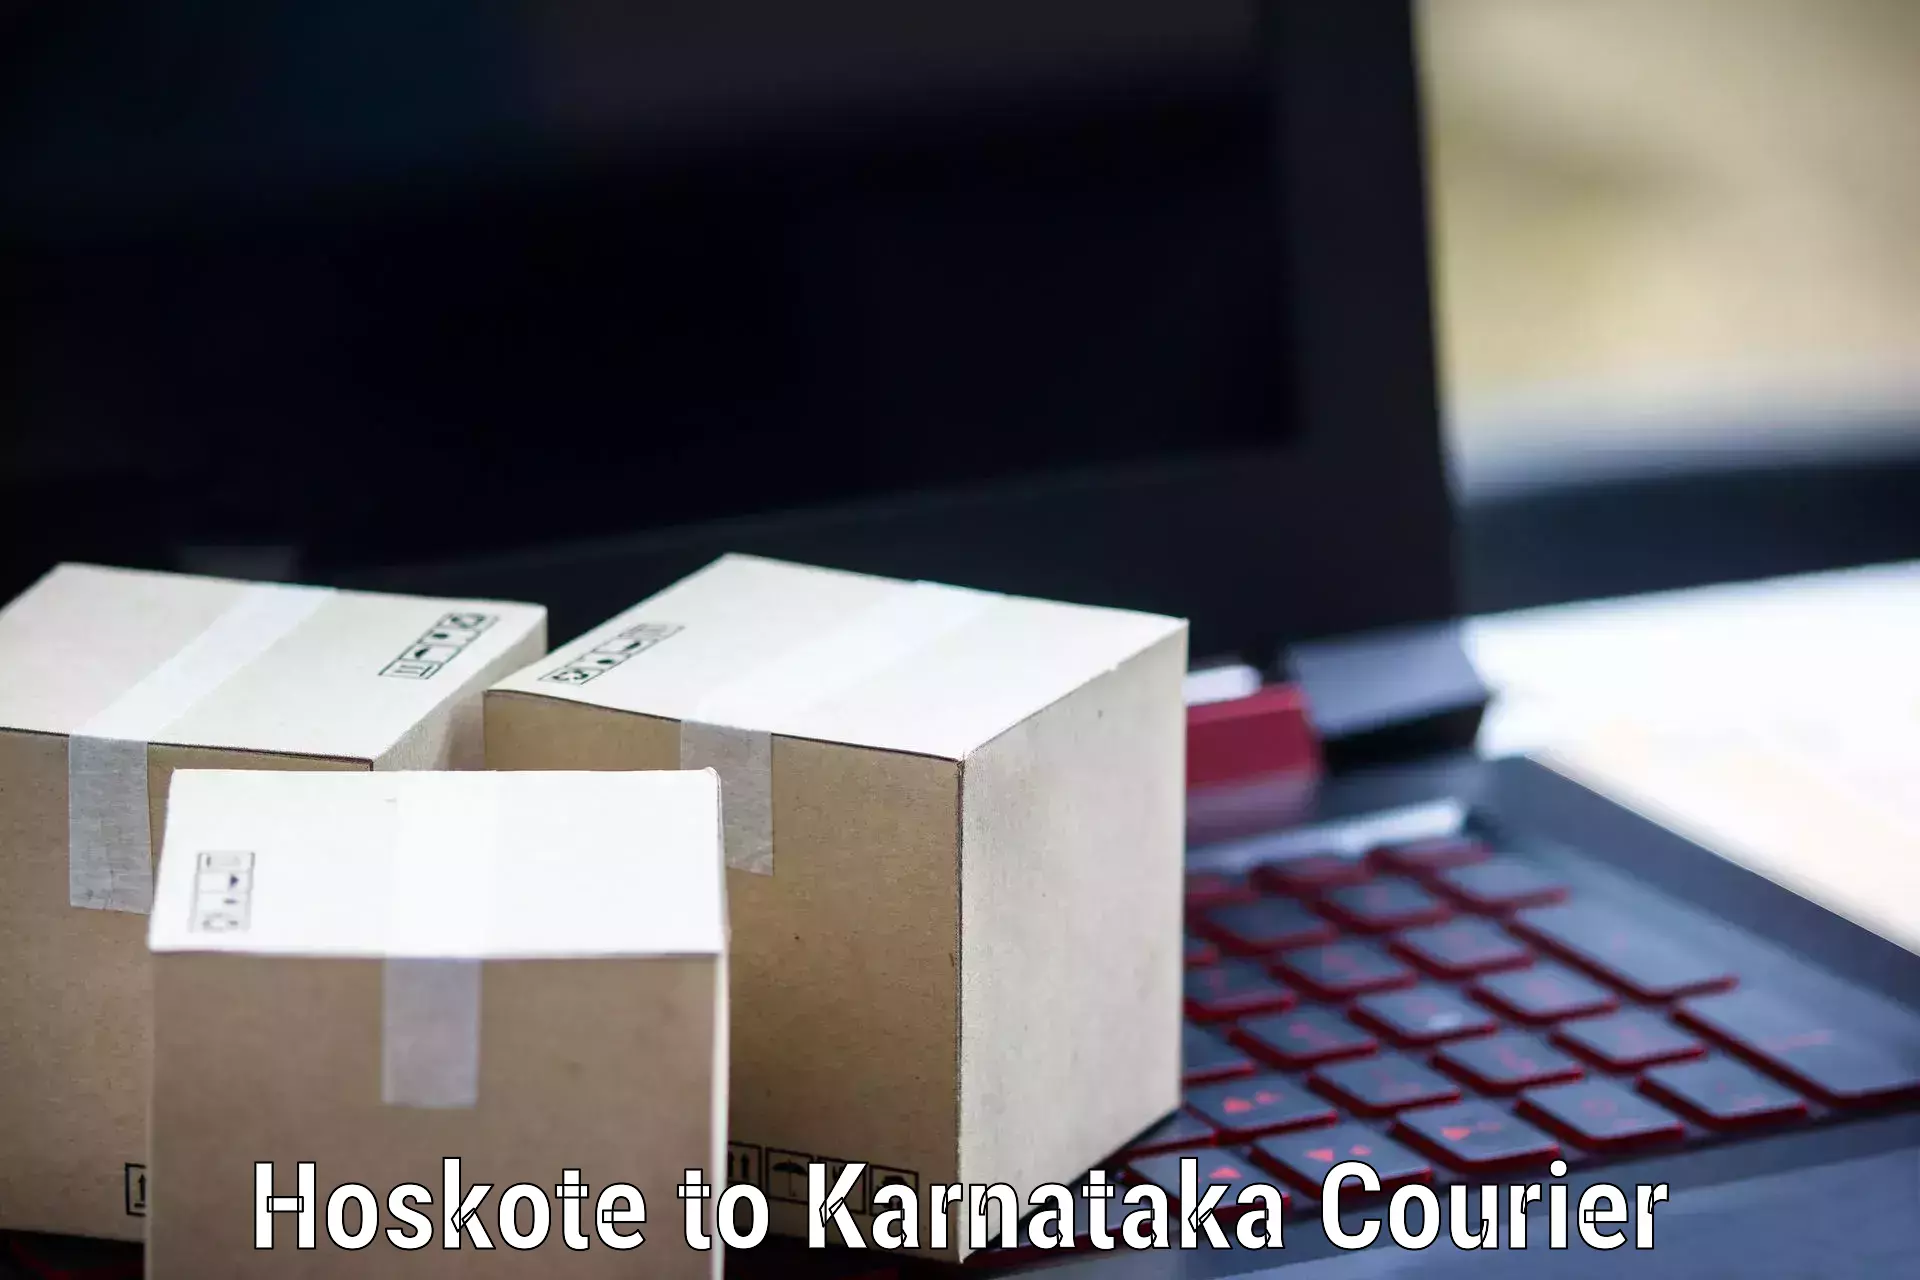 Quality courier services in Hoskote to Pavagada